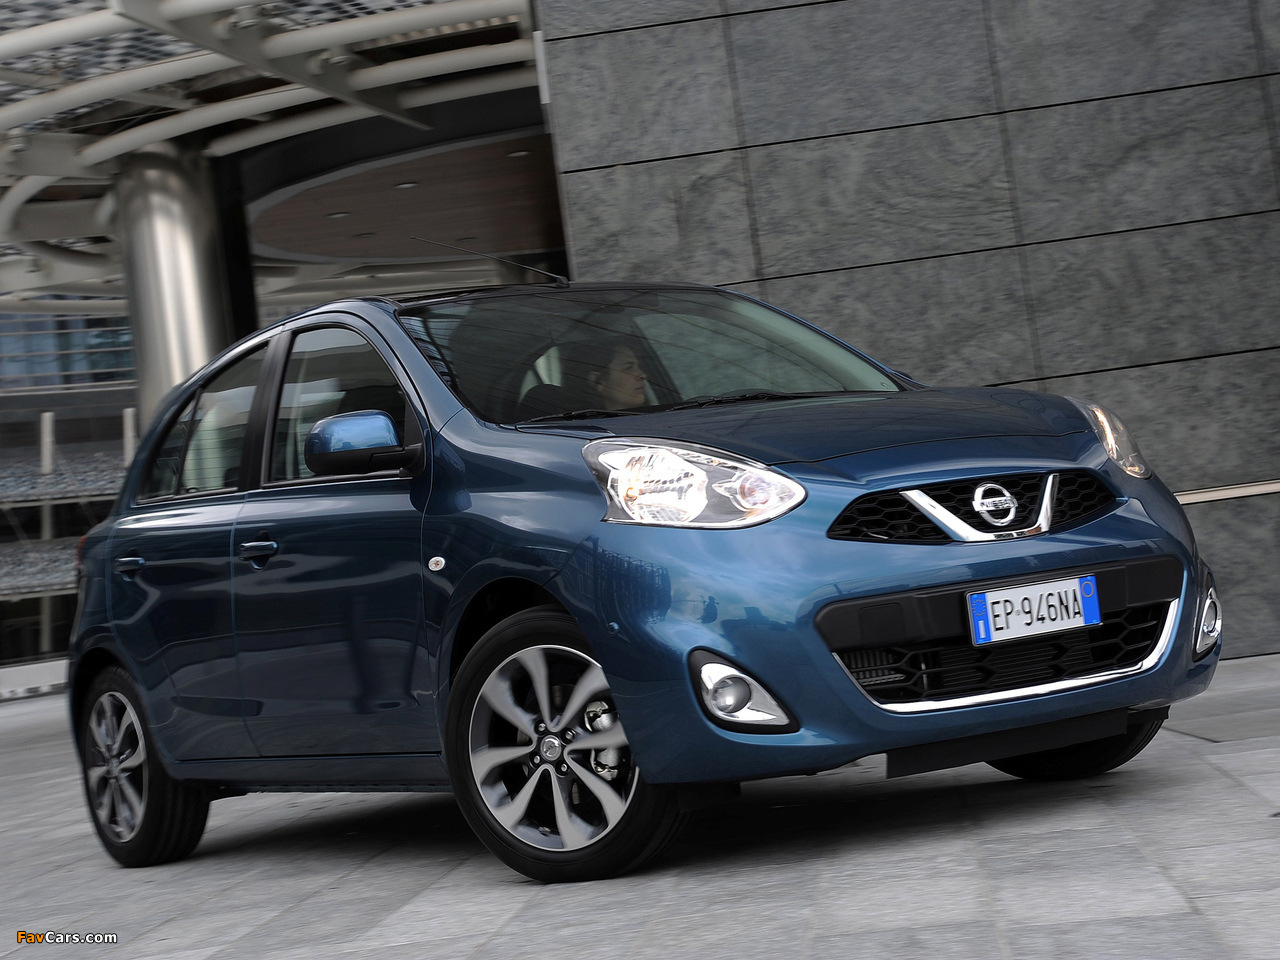 Images of Nissan Micra (K13) 2013 (1280x960)